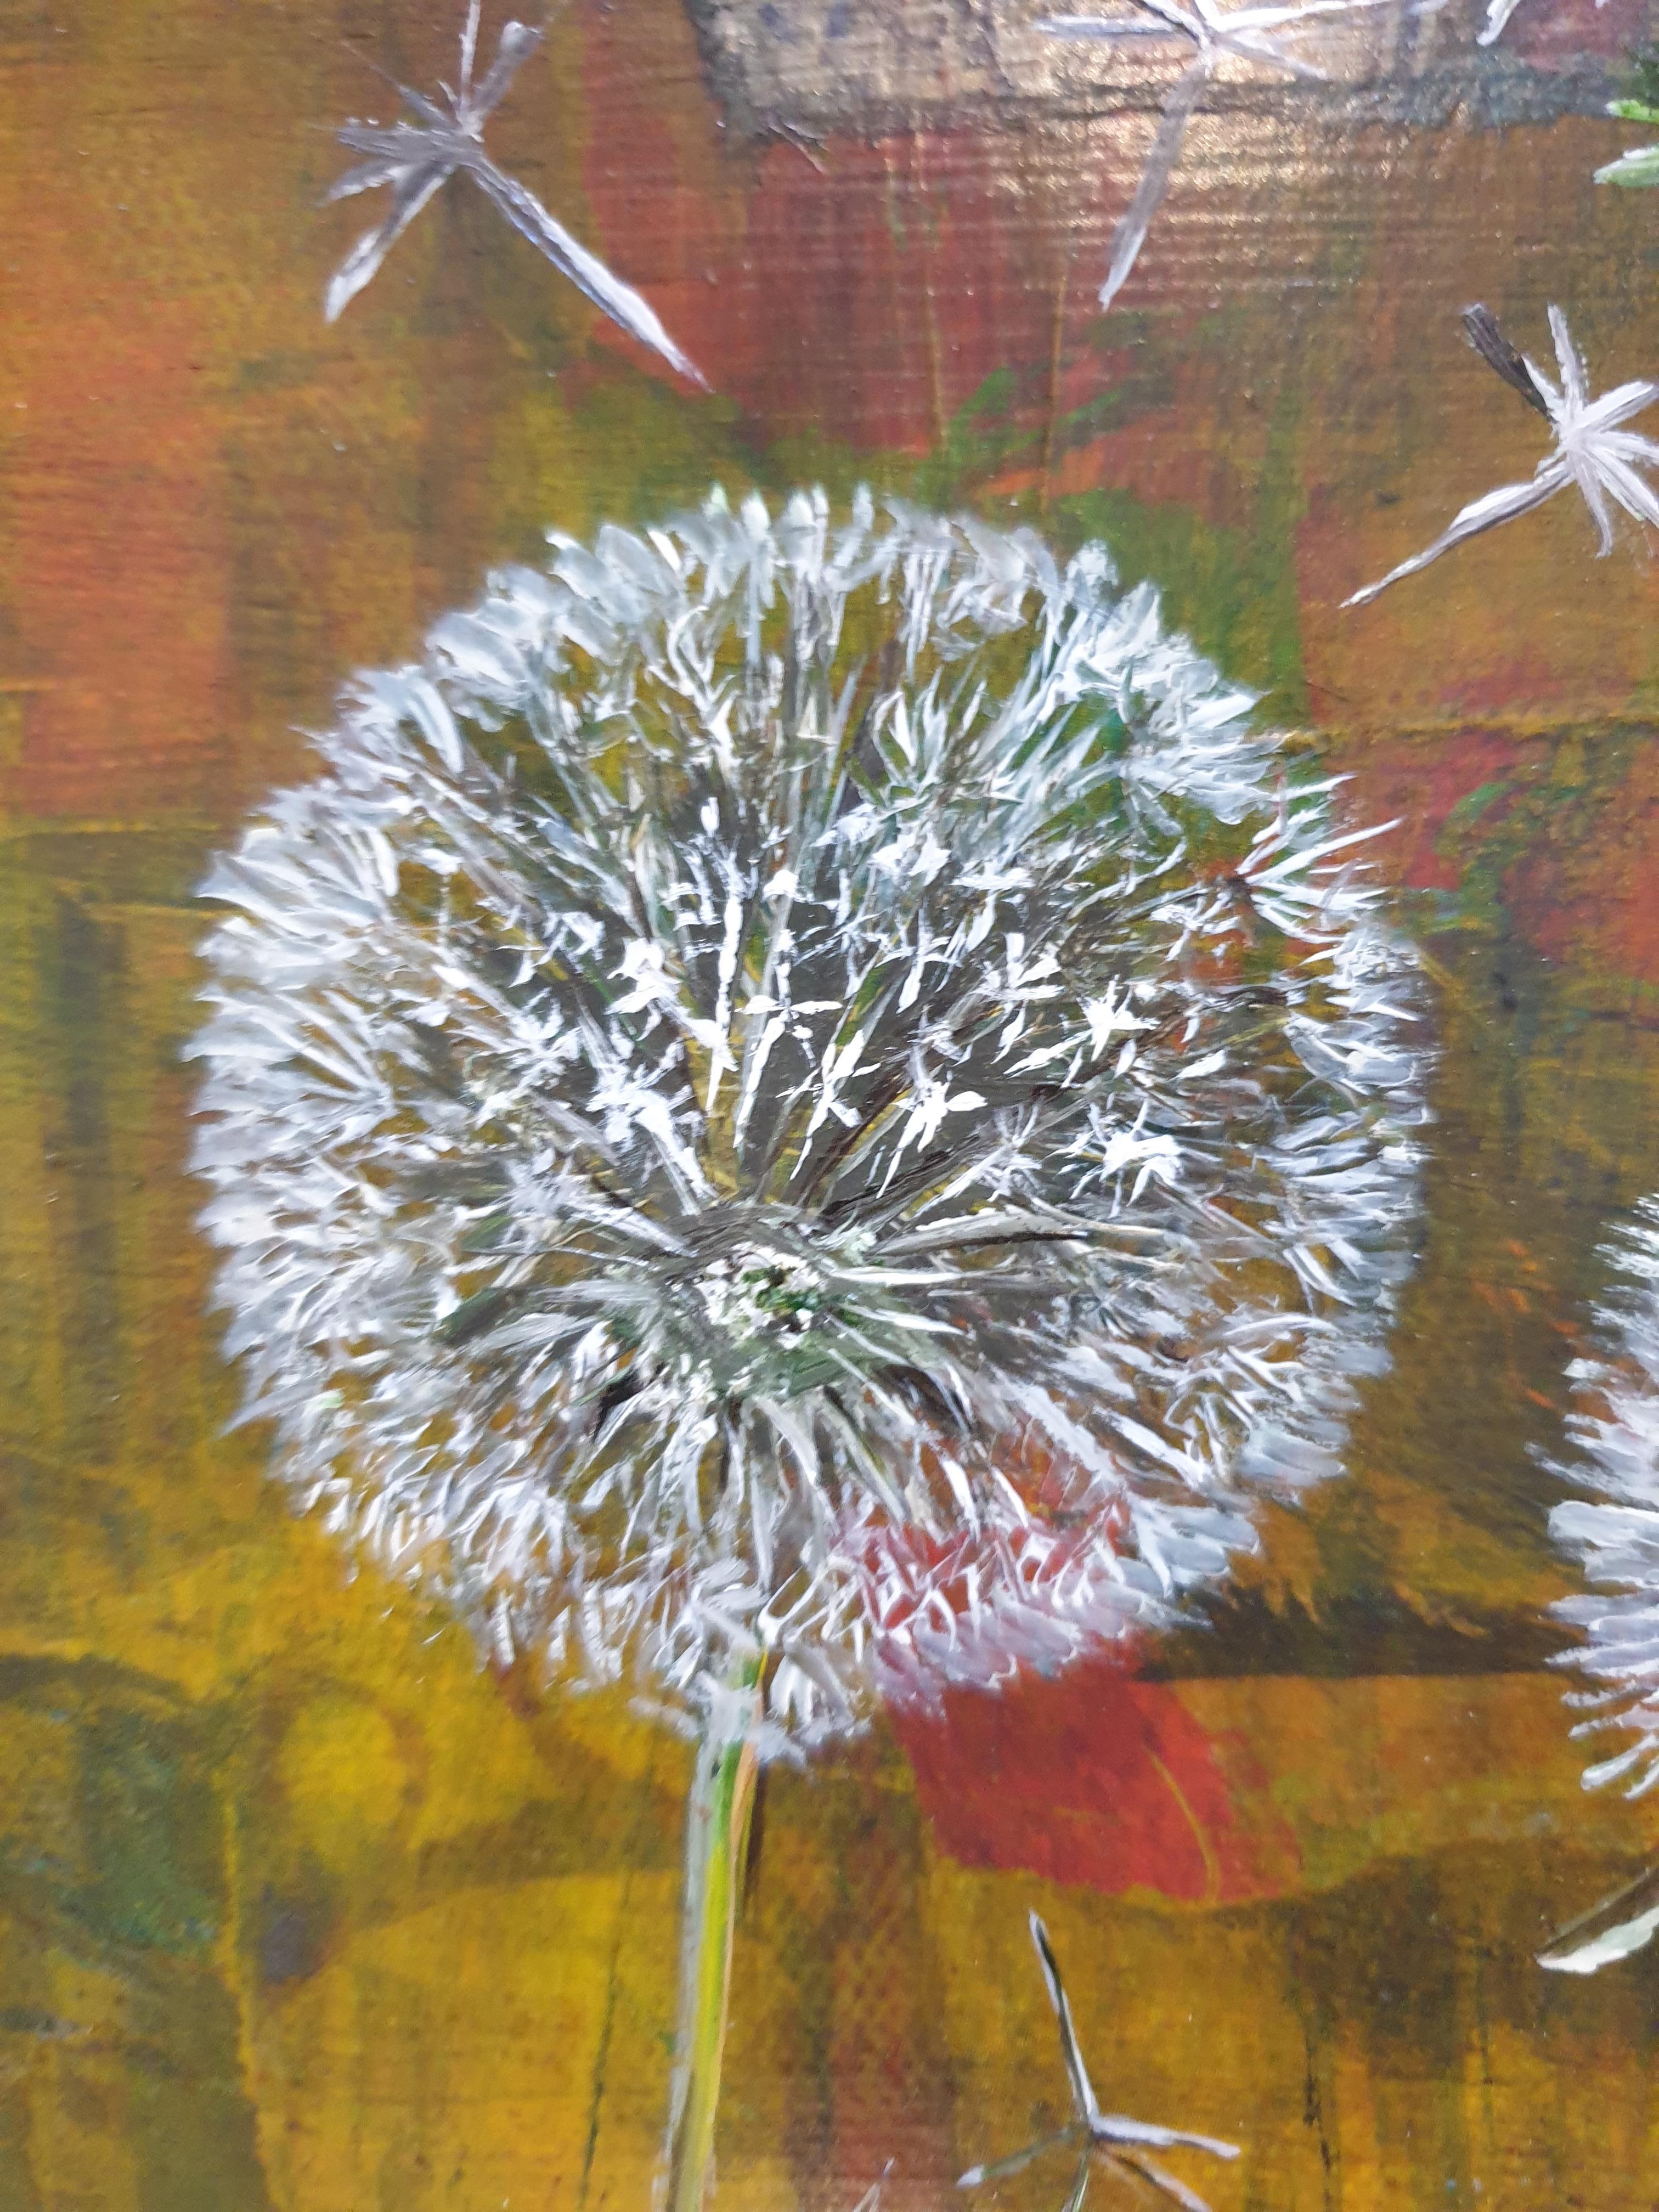 Dandelion clocks. Contemporary botanical mixed-media, oil and acrylic on board by Dutch artist Menno Modderman,  signed and dated 2022 to the bottom left and presented in a contemporary black tray frame.

Working for several years now as an artist